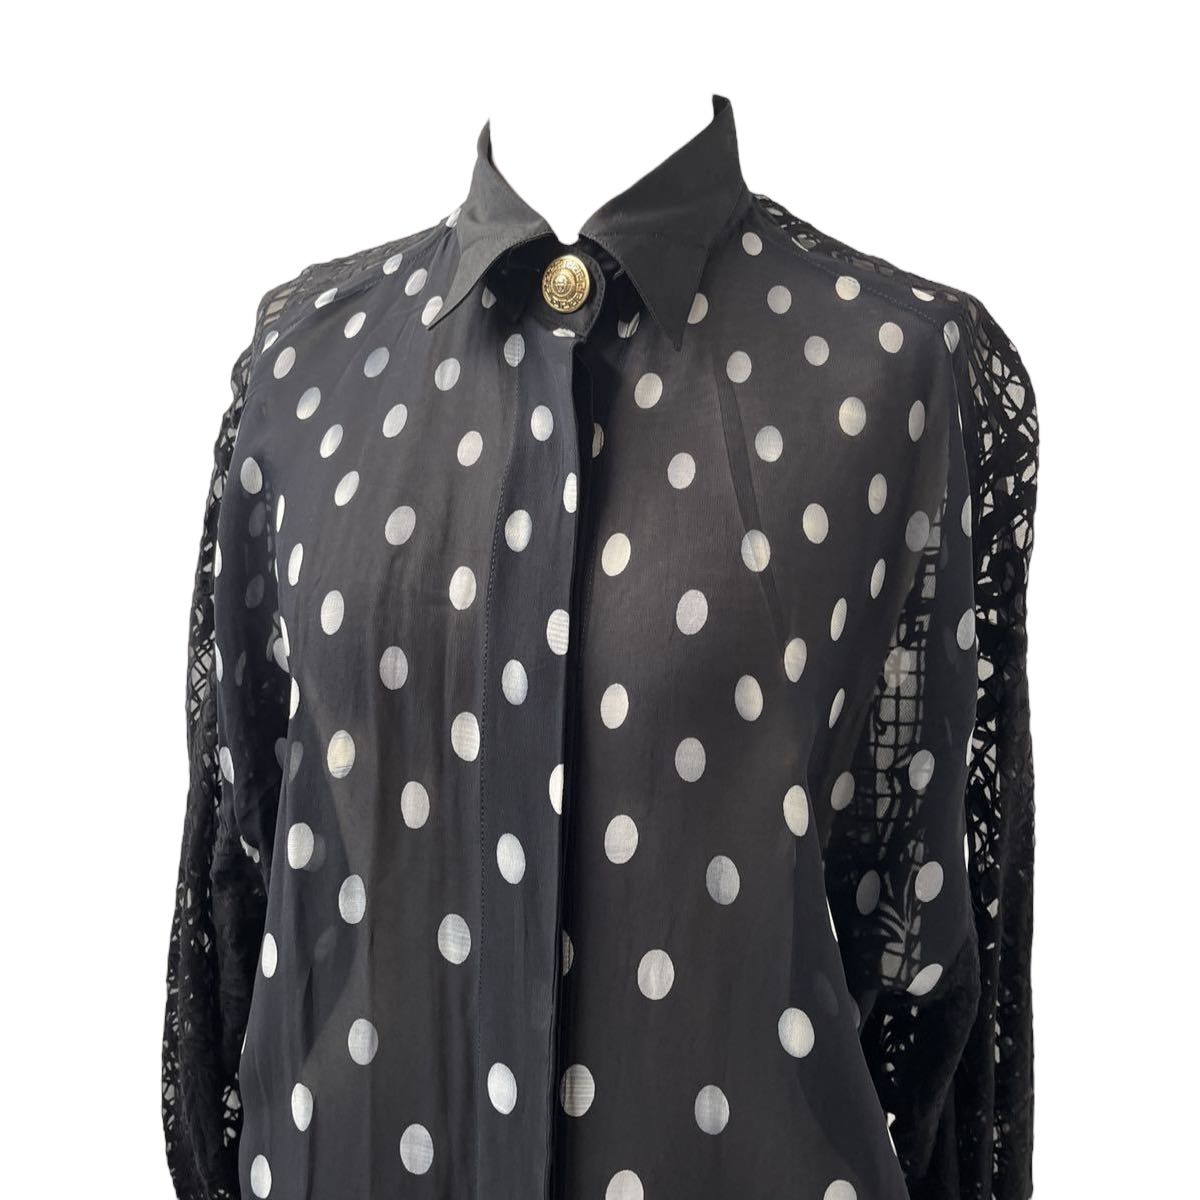 Vintage Gianni Versace Couture Sheer Polka Dot Button-Down Tunic with Burnout Lace Back and Sleeves - 5